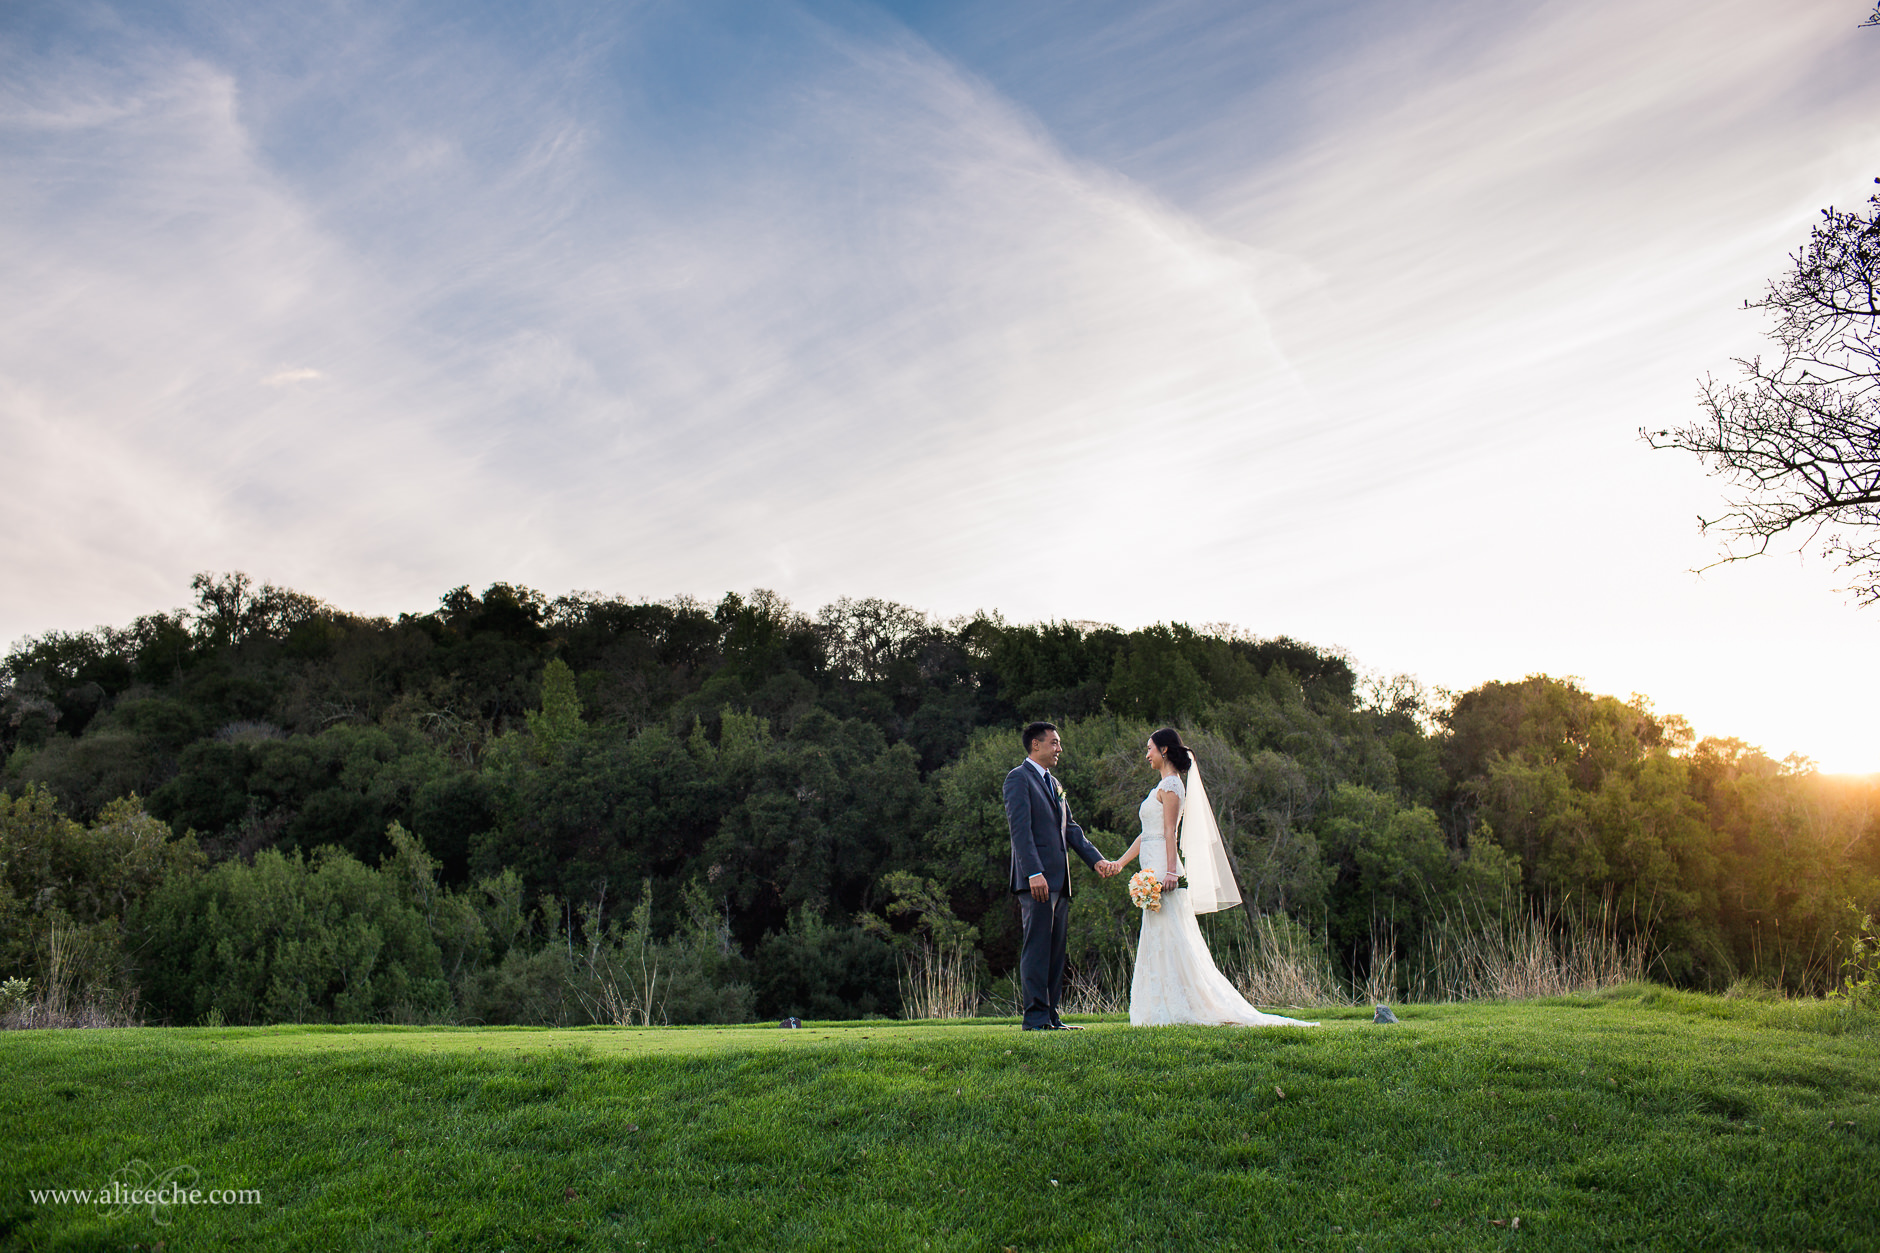 Bride and Groom on Golf Course at Sunset in San Jose, CA